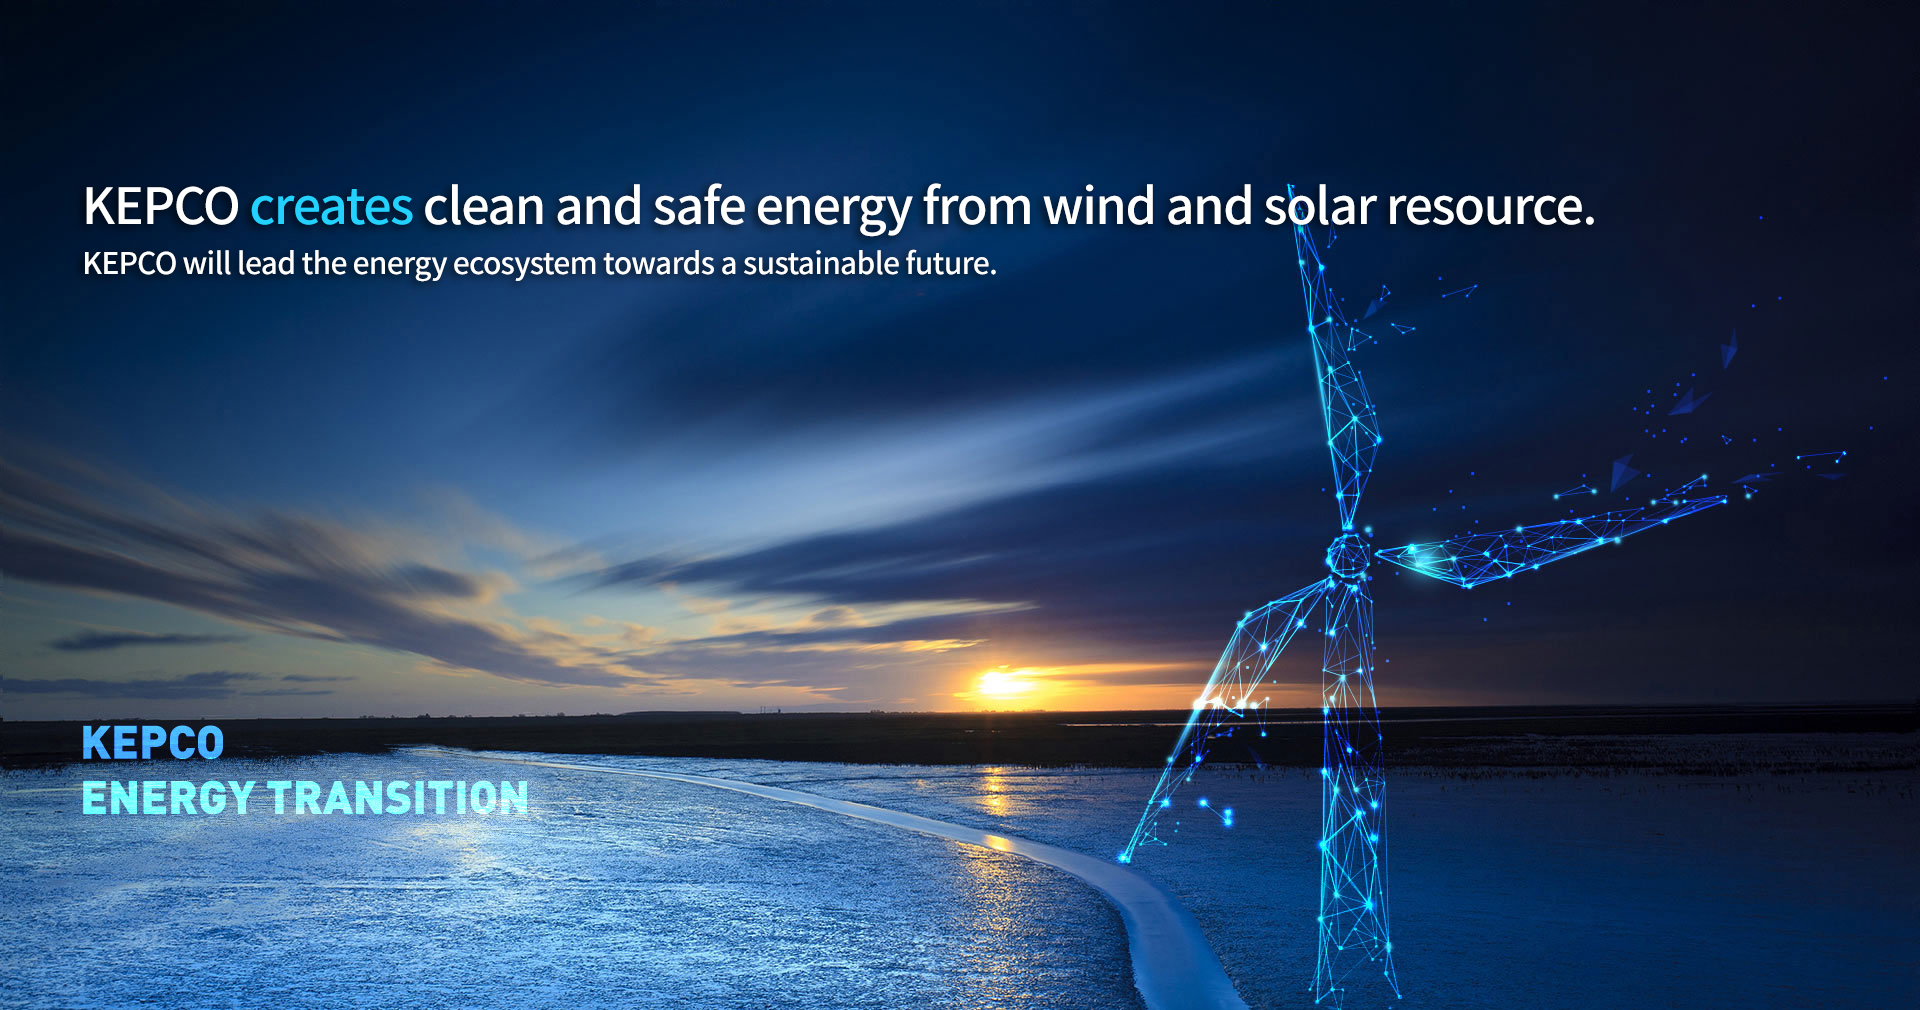 KEPCO creates clean and safe energy using wind and solar power. KEPCO will lead the energy ecosystem towards a sustainable future. KEPCO ENERGY TRANSITION